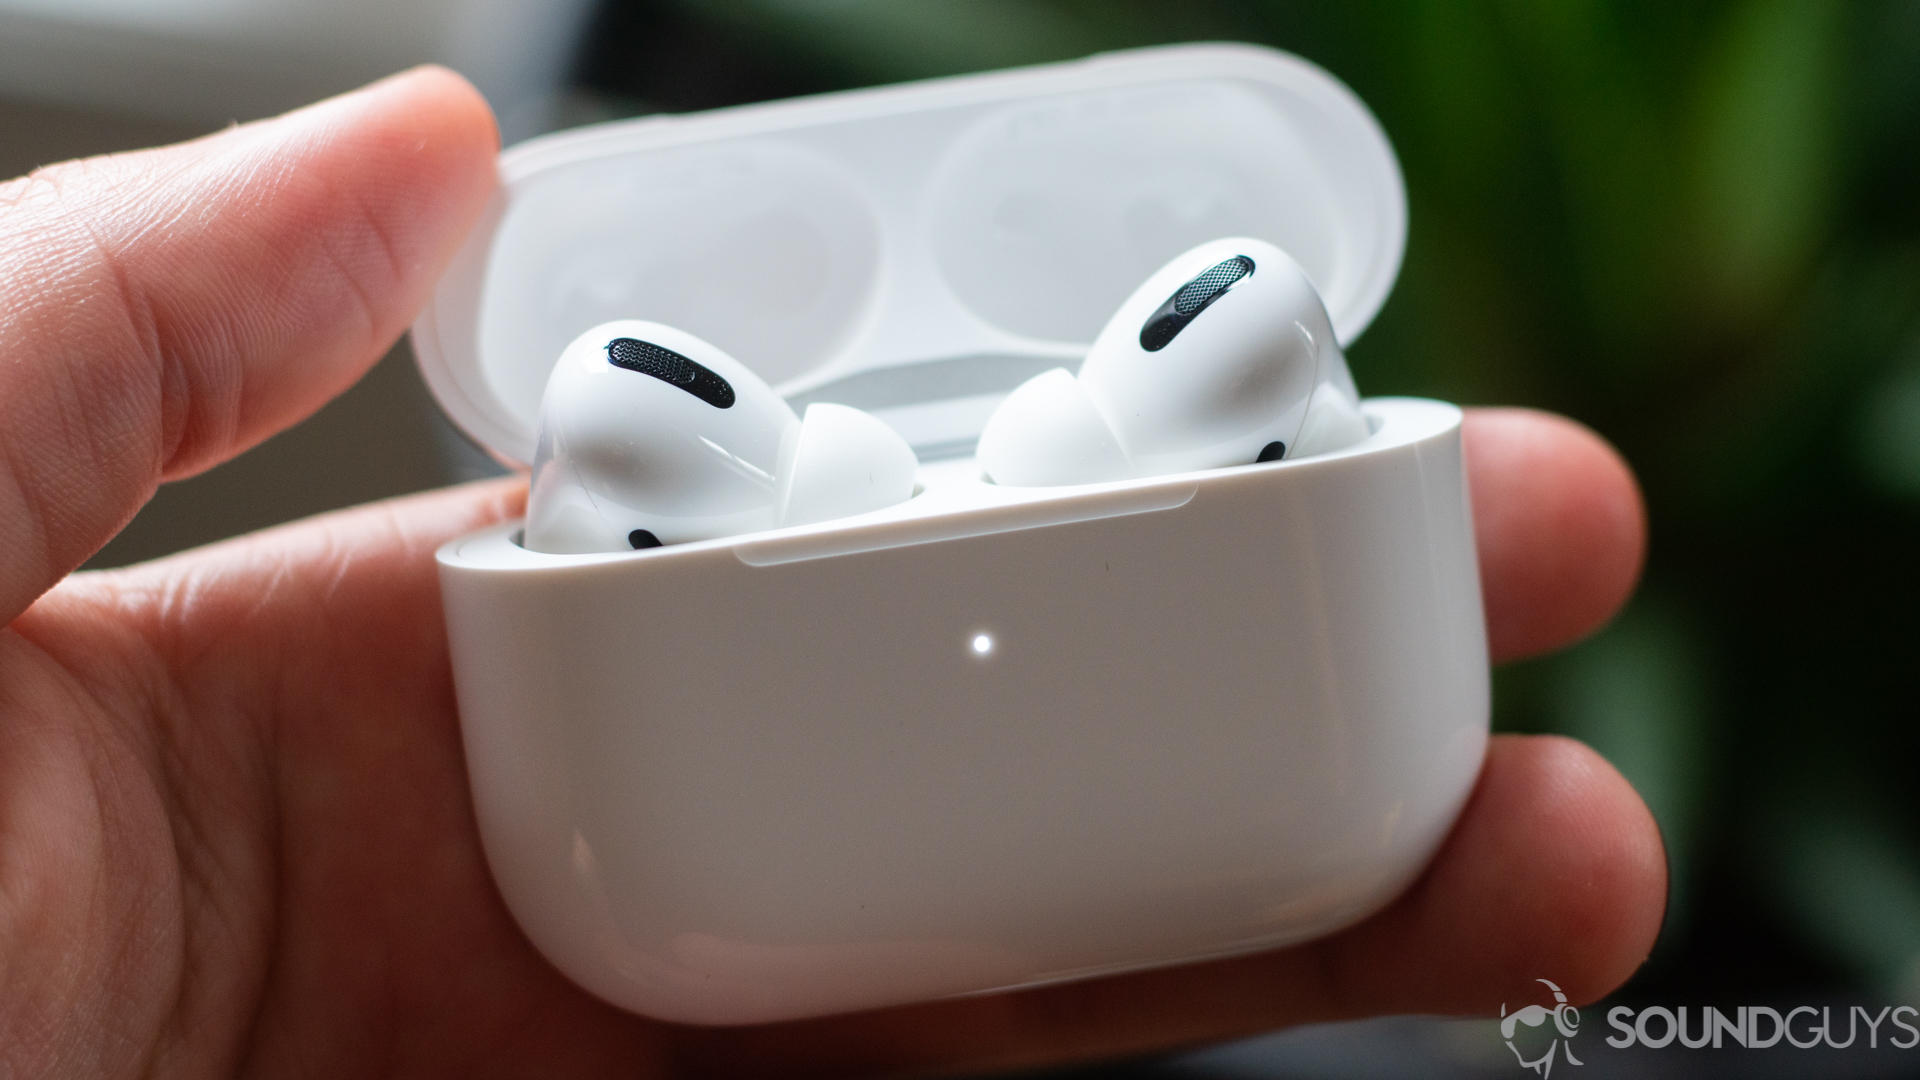 Apple AirPods Pro earbuds charging case in a man's hand.